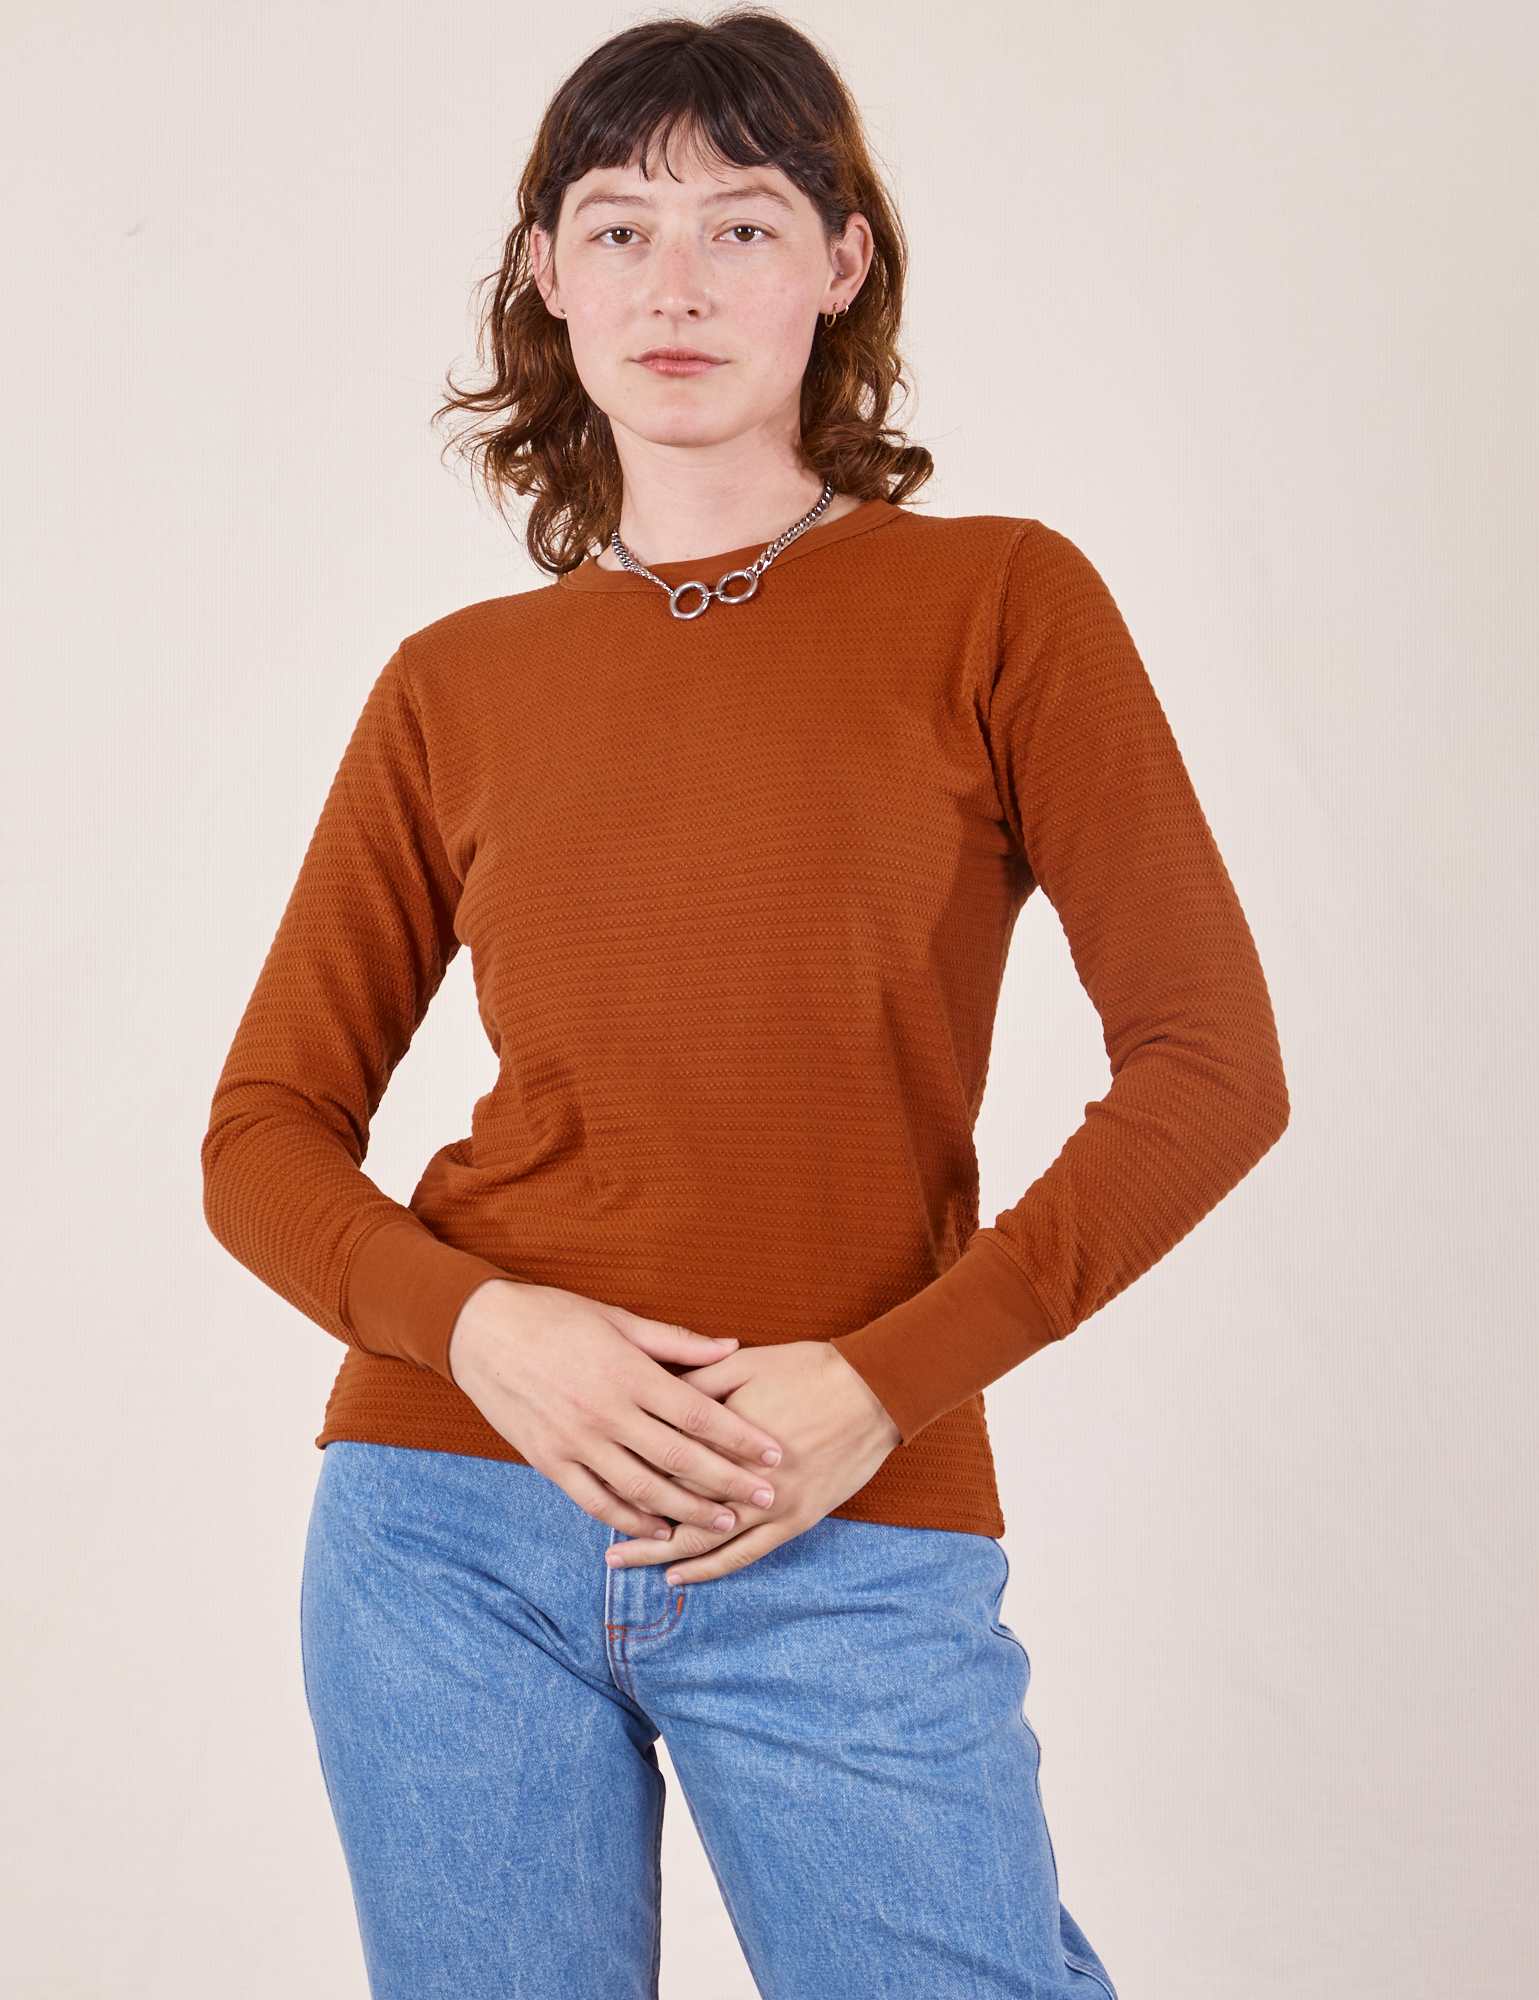 Alex is wearing P Honeycomb Thermal in Burnt Terracotta